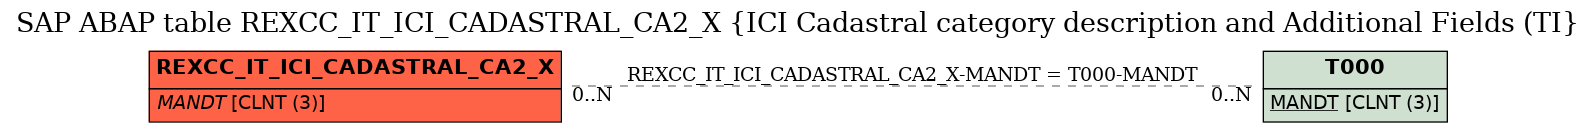 E-R Diagram for table REXCC_IT_ICI_CADASTRAL_CA2_X (ICI Cadastral category description and Additional Fields (TI)